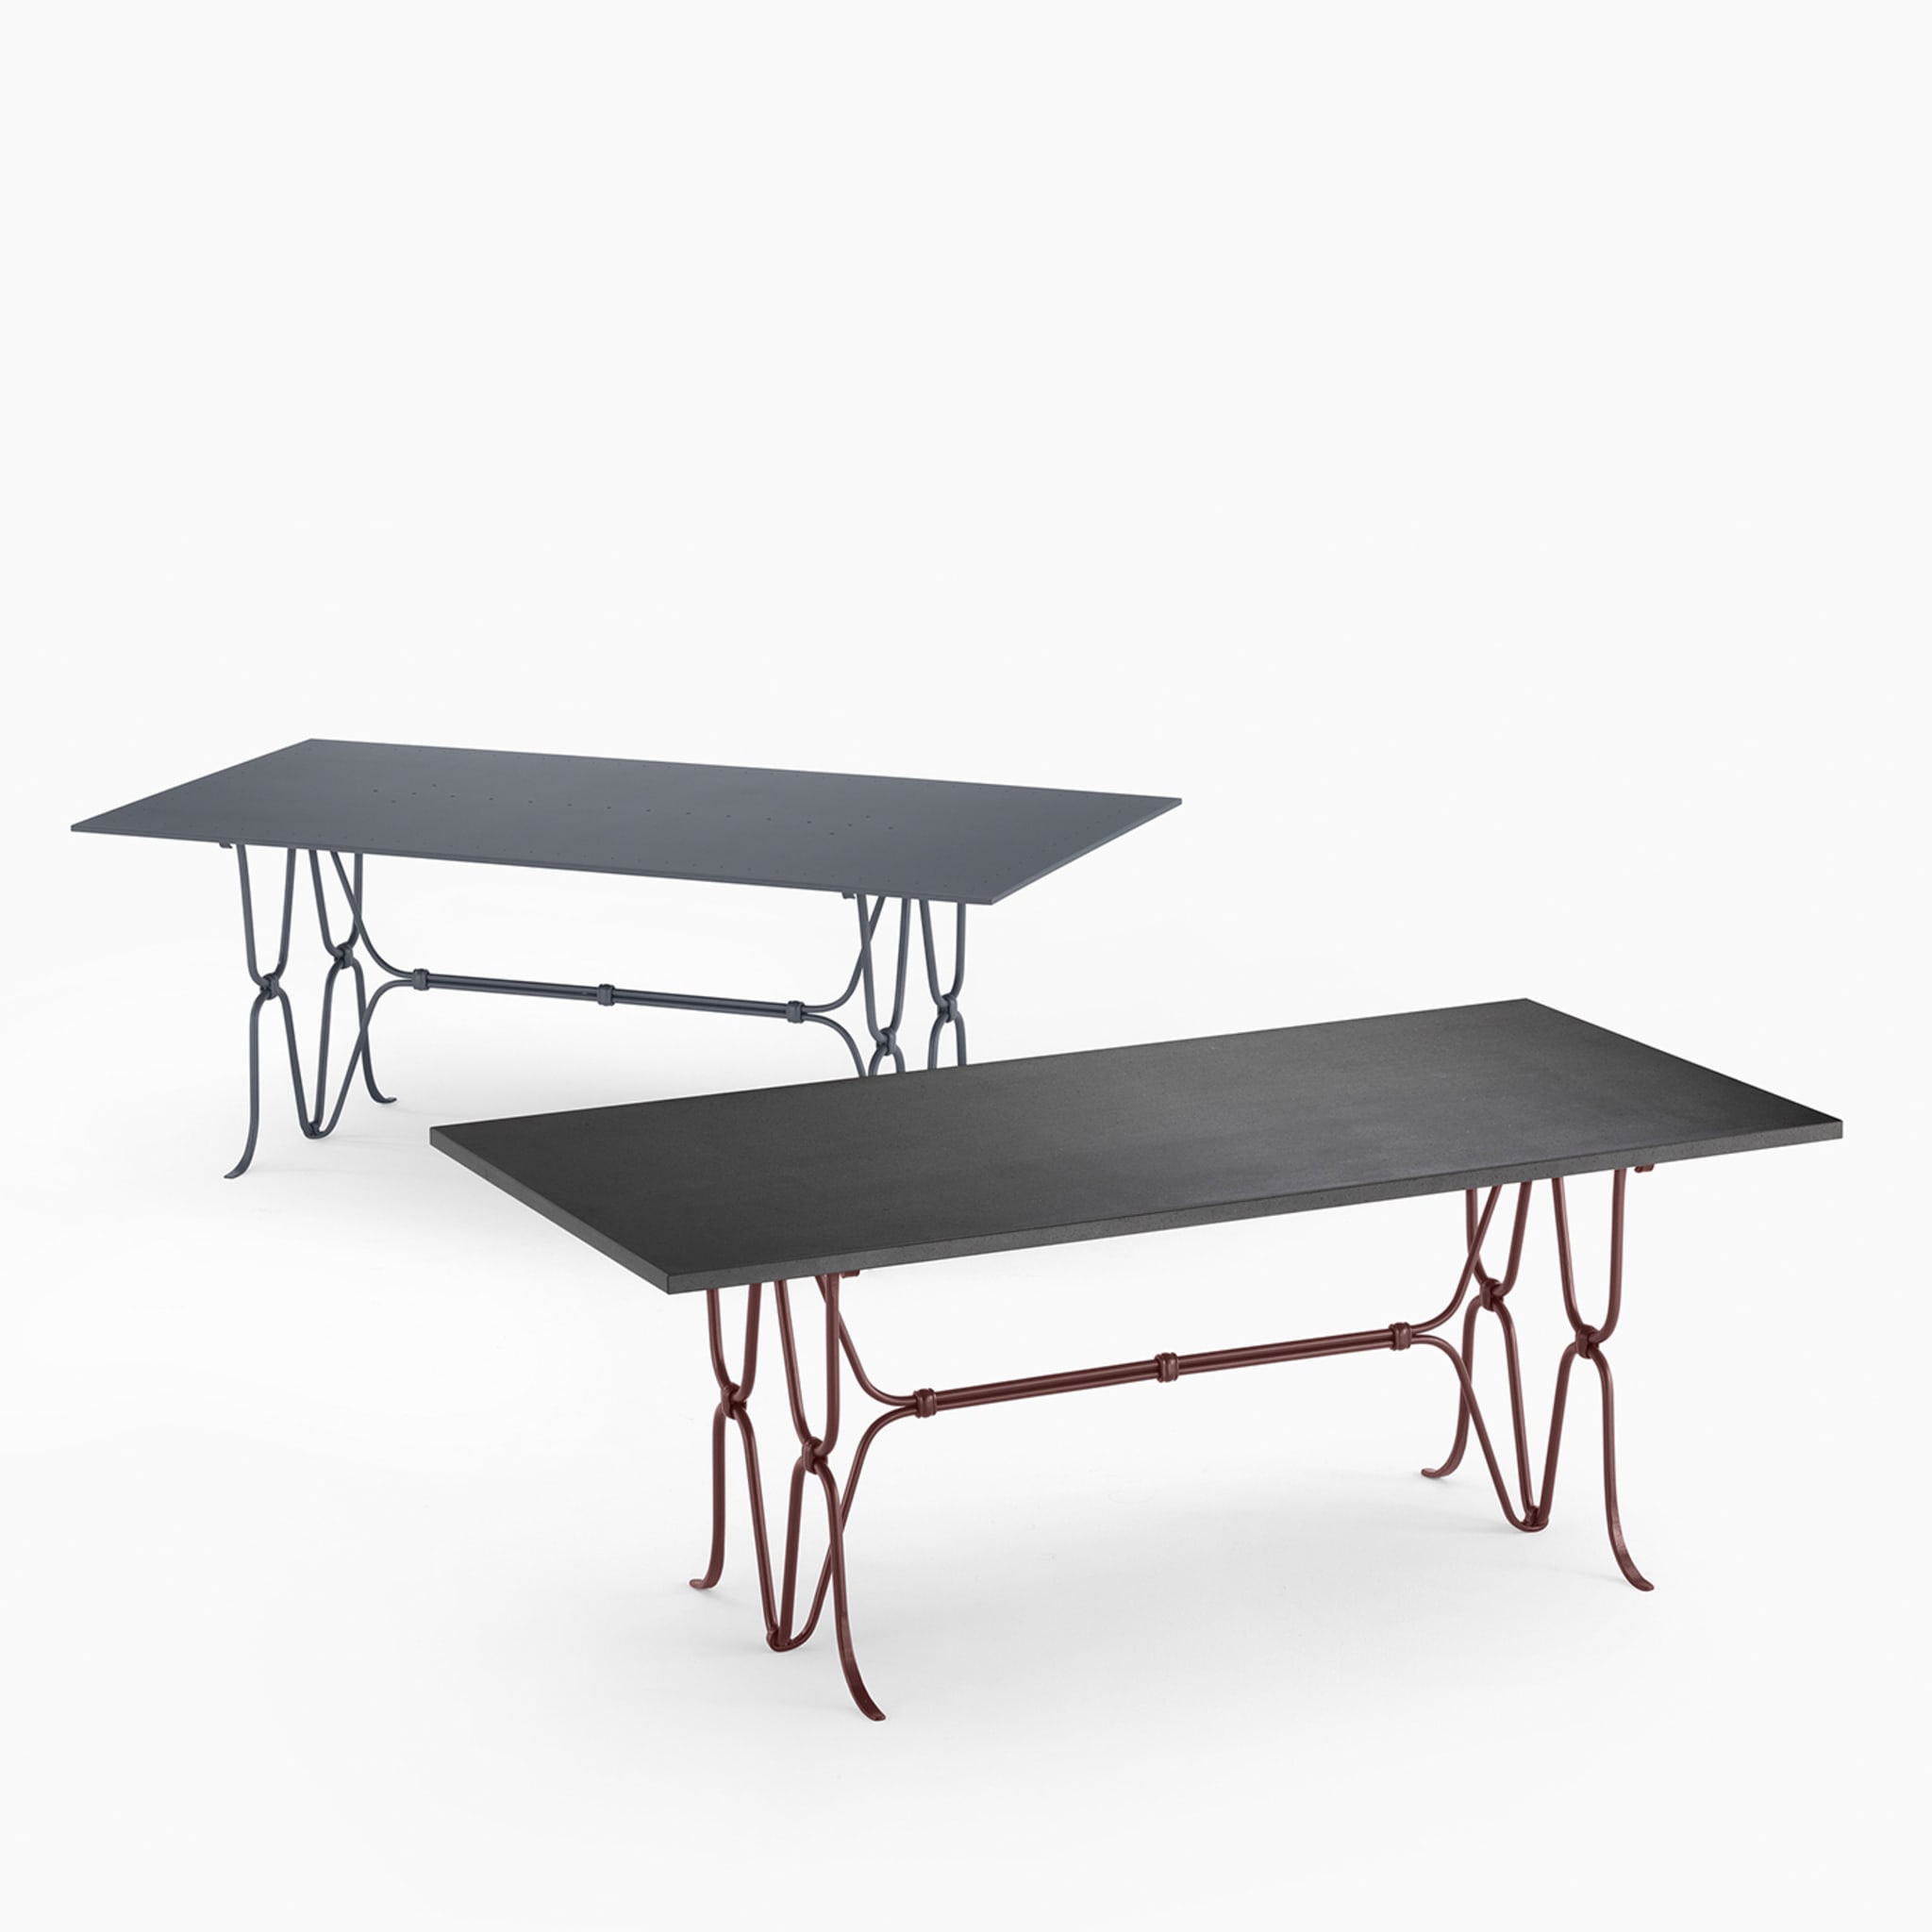 Ligare Lava-Stone-Top & Wrought Iron Brown Rectangular Table - Alternative view 1